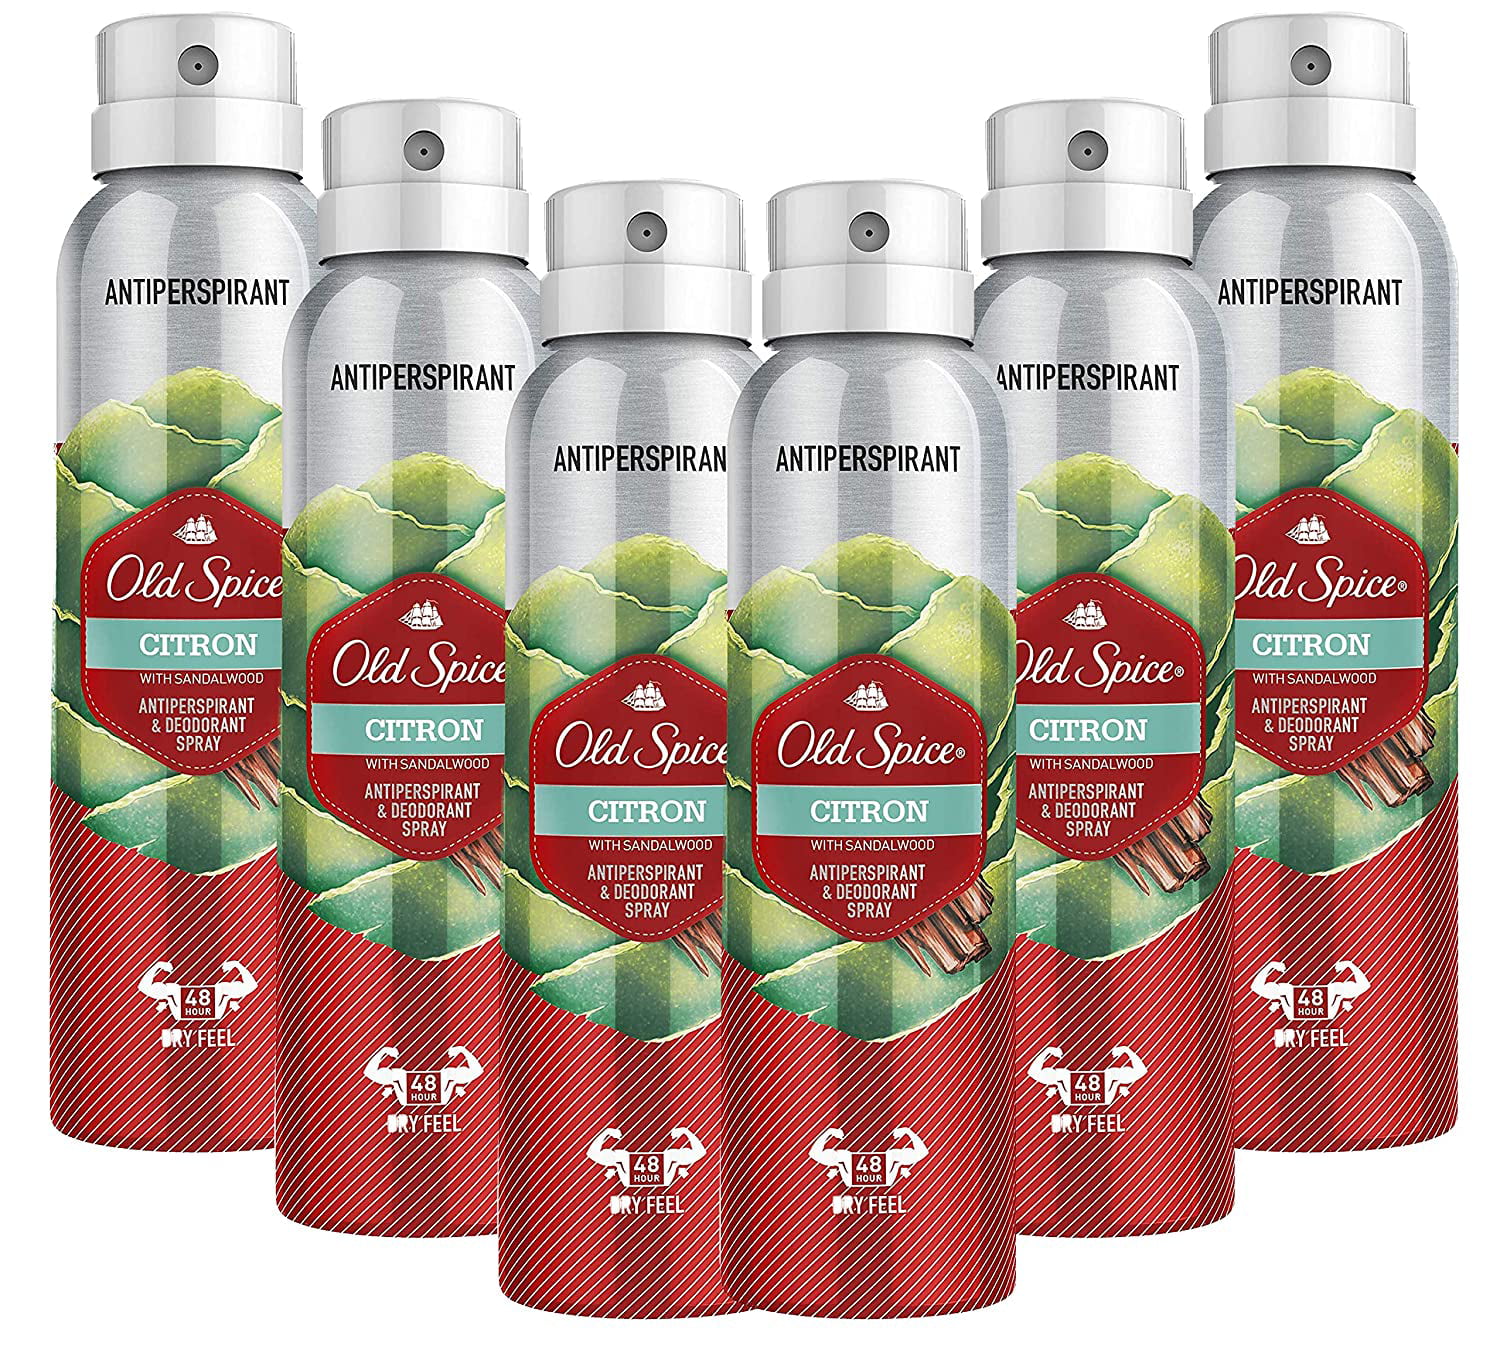 Old Spice Antiperspirant And Deodorant Spray Citron With Sandalwood Scent 48 Hour Dry Feel 5